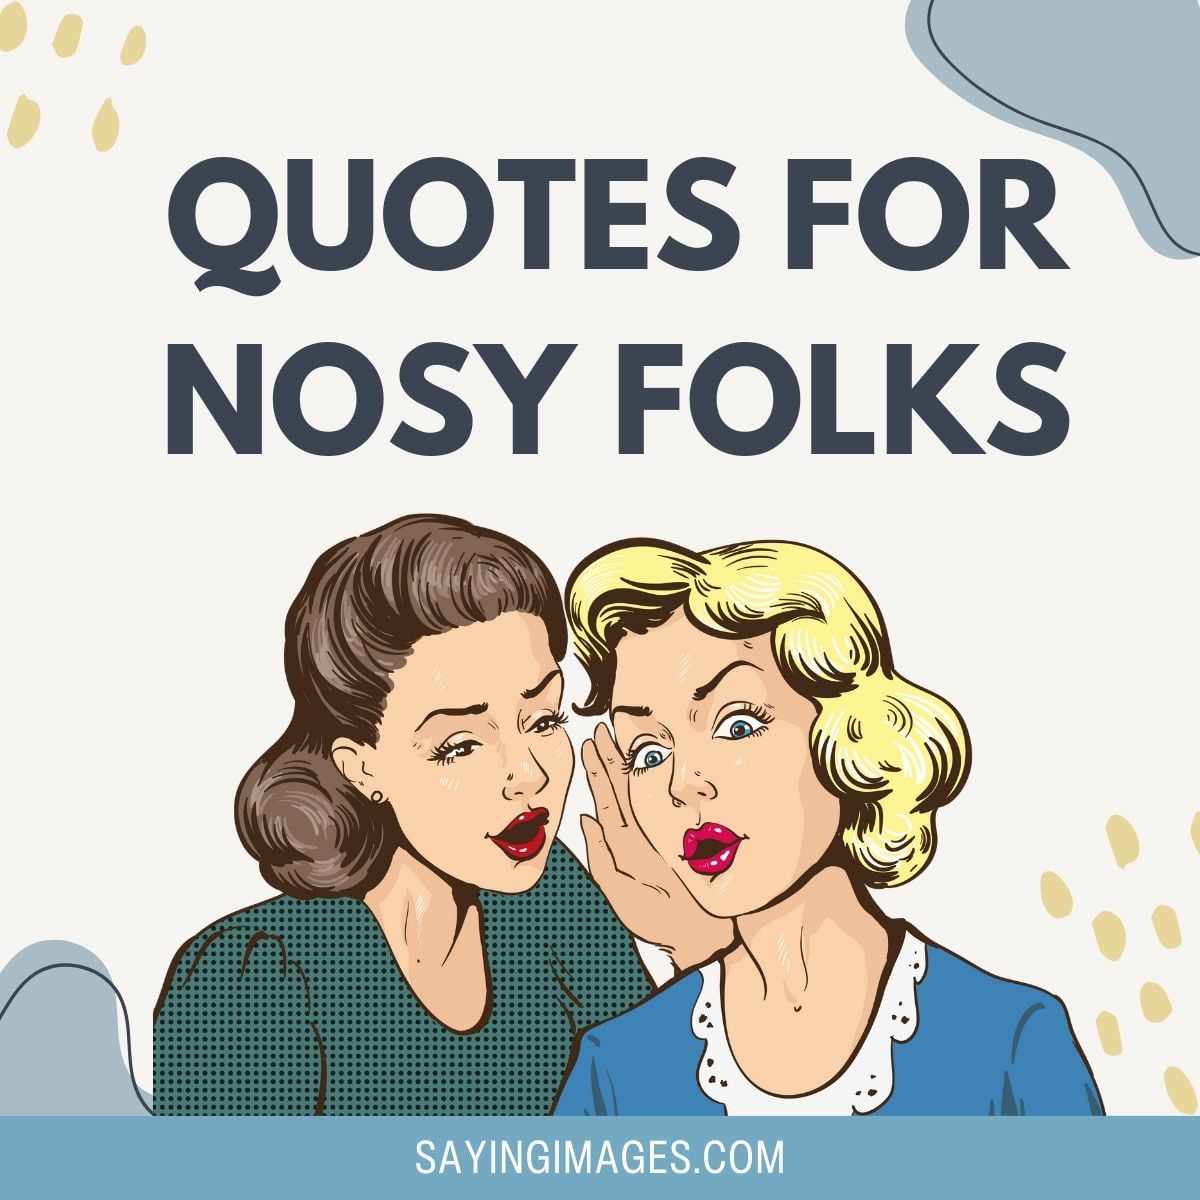 75 Quotes For Nosy Folks